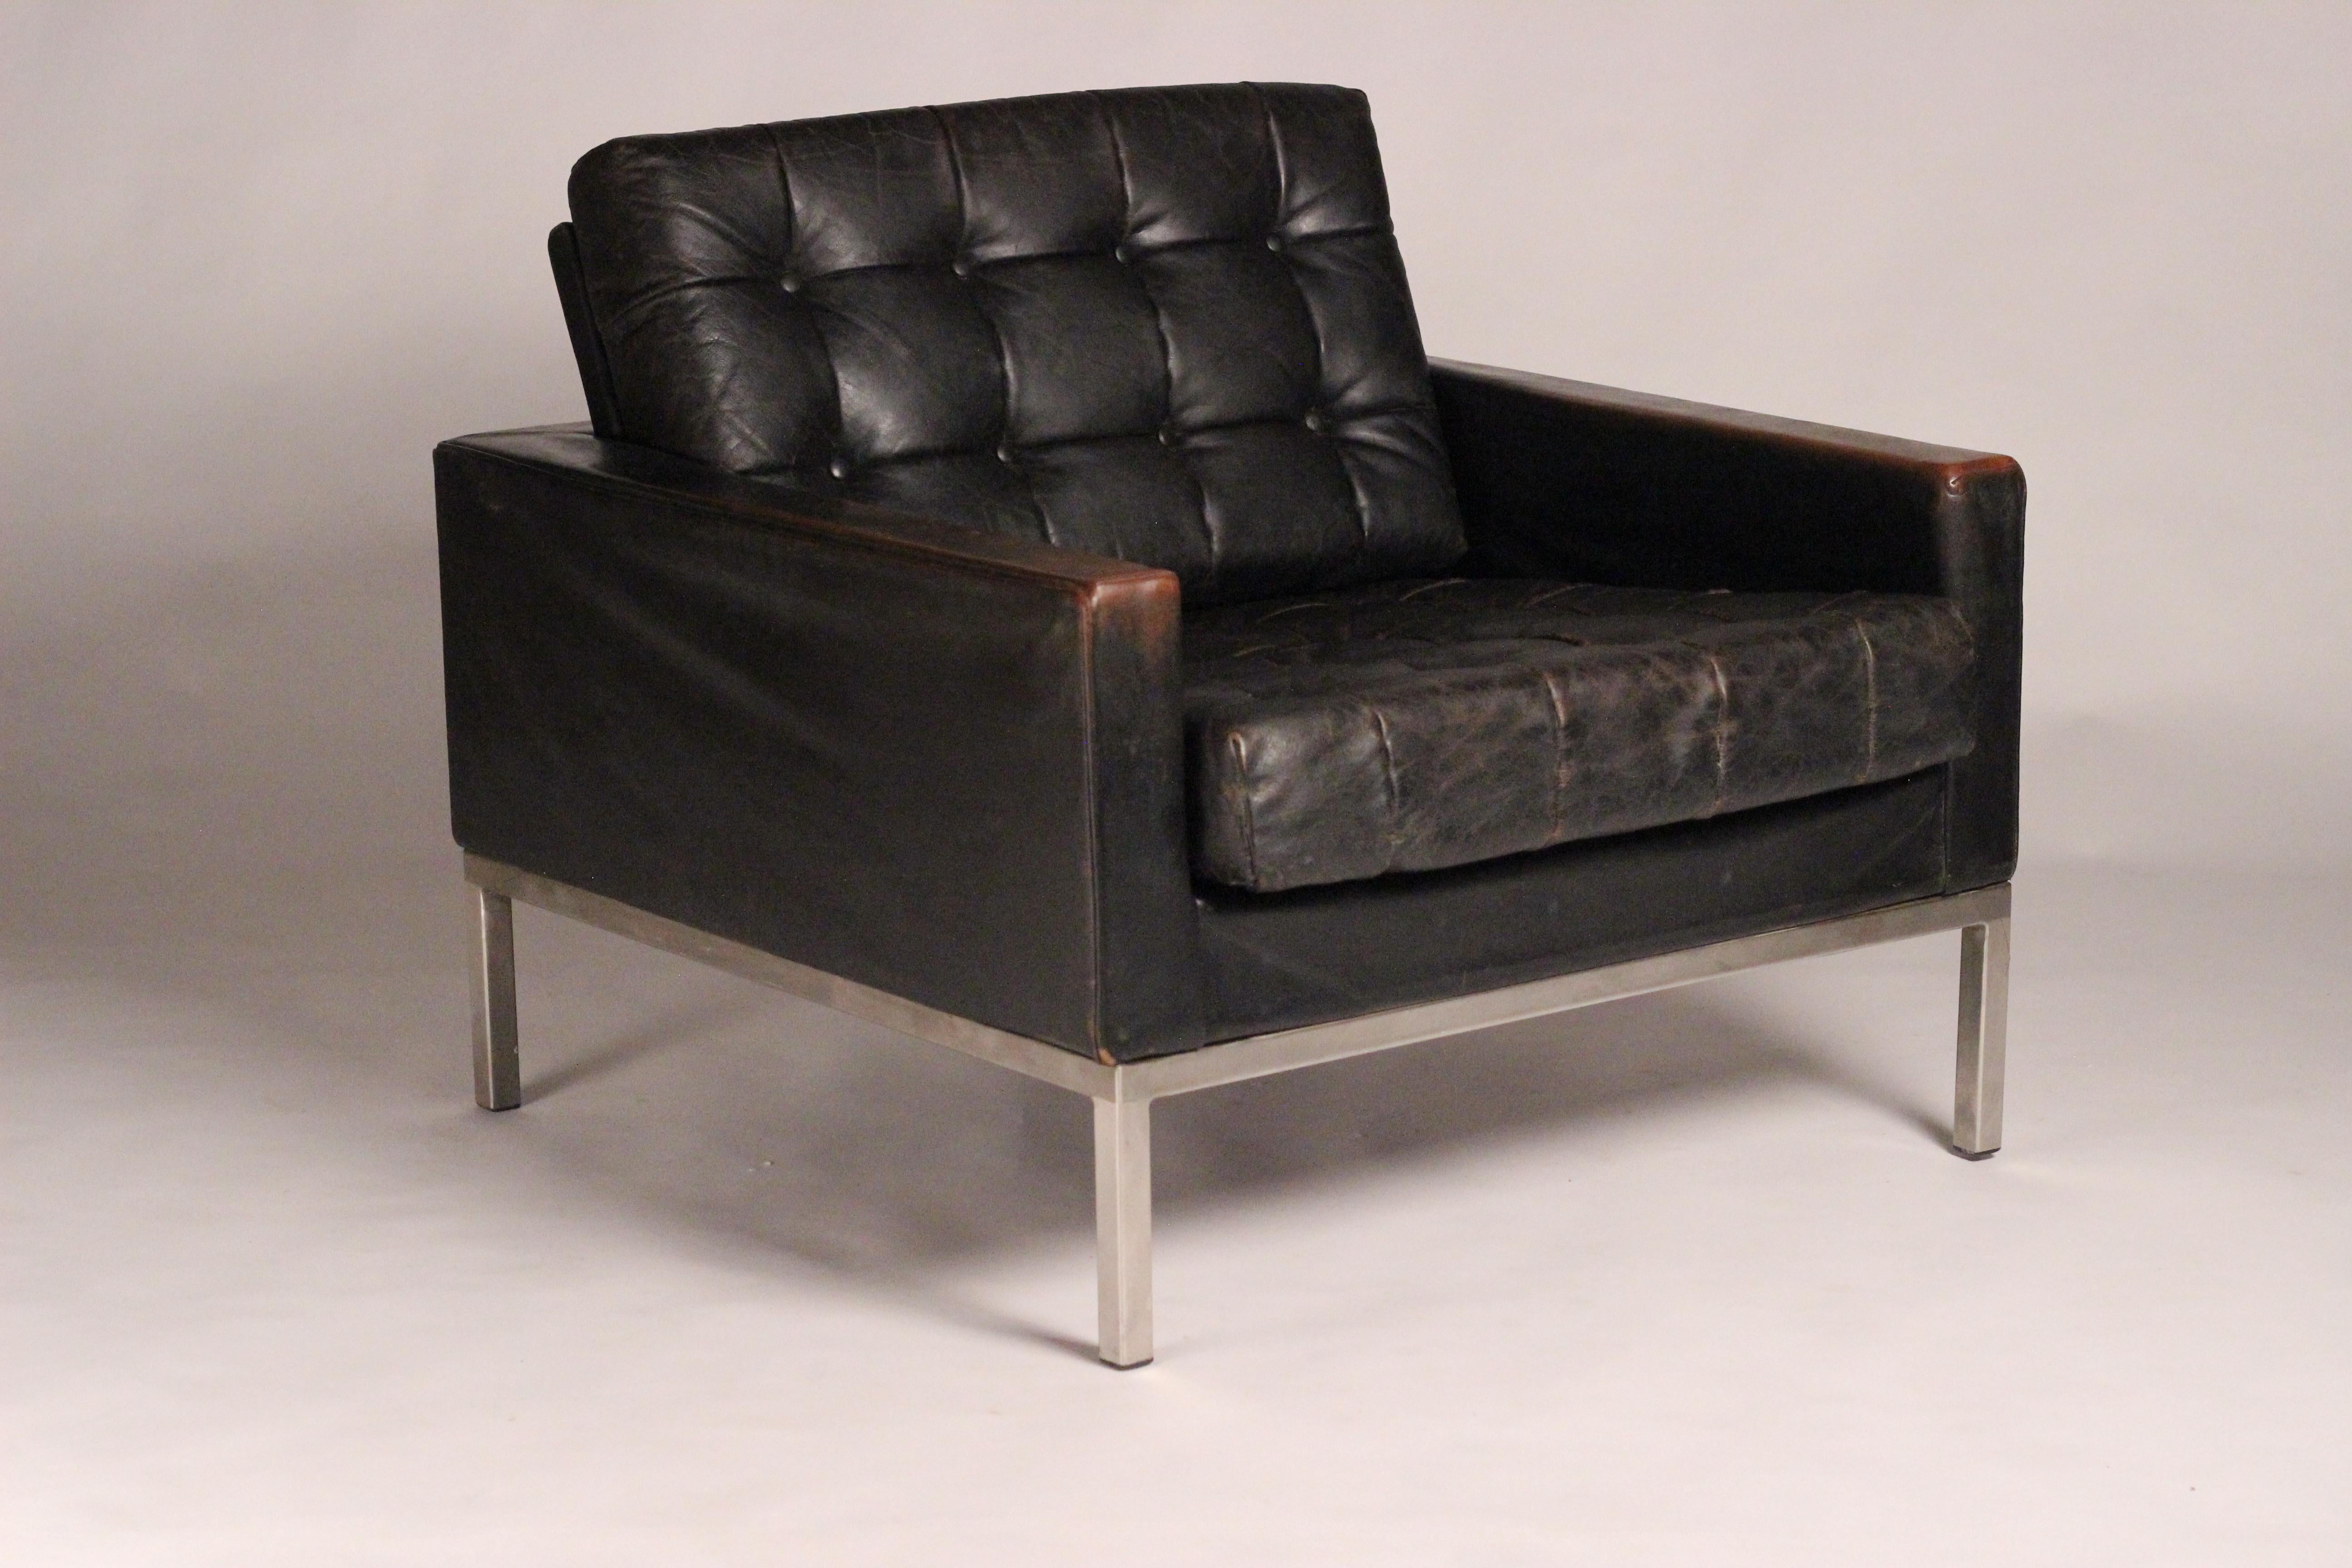 One of a set of 3 club chairs designed by Robin Day in 1962 that we currently have in stock. Robin Day designed the Club as a modern take on the Classic Chesterfield and it became Britain’s original ‘cube sofa’. The Club was designed to fit in both